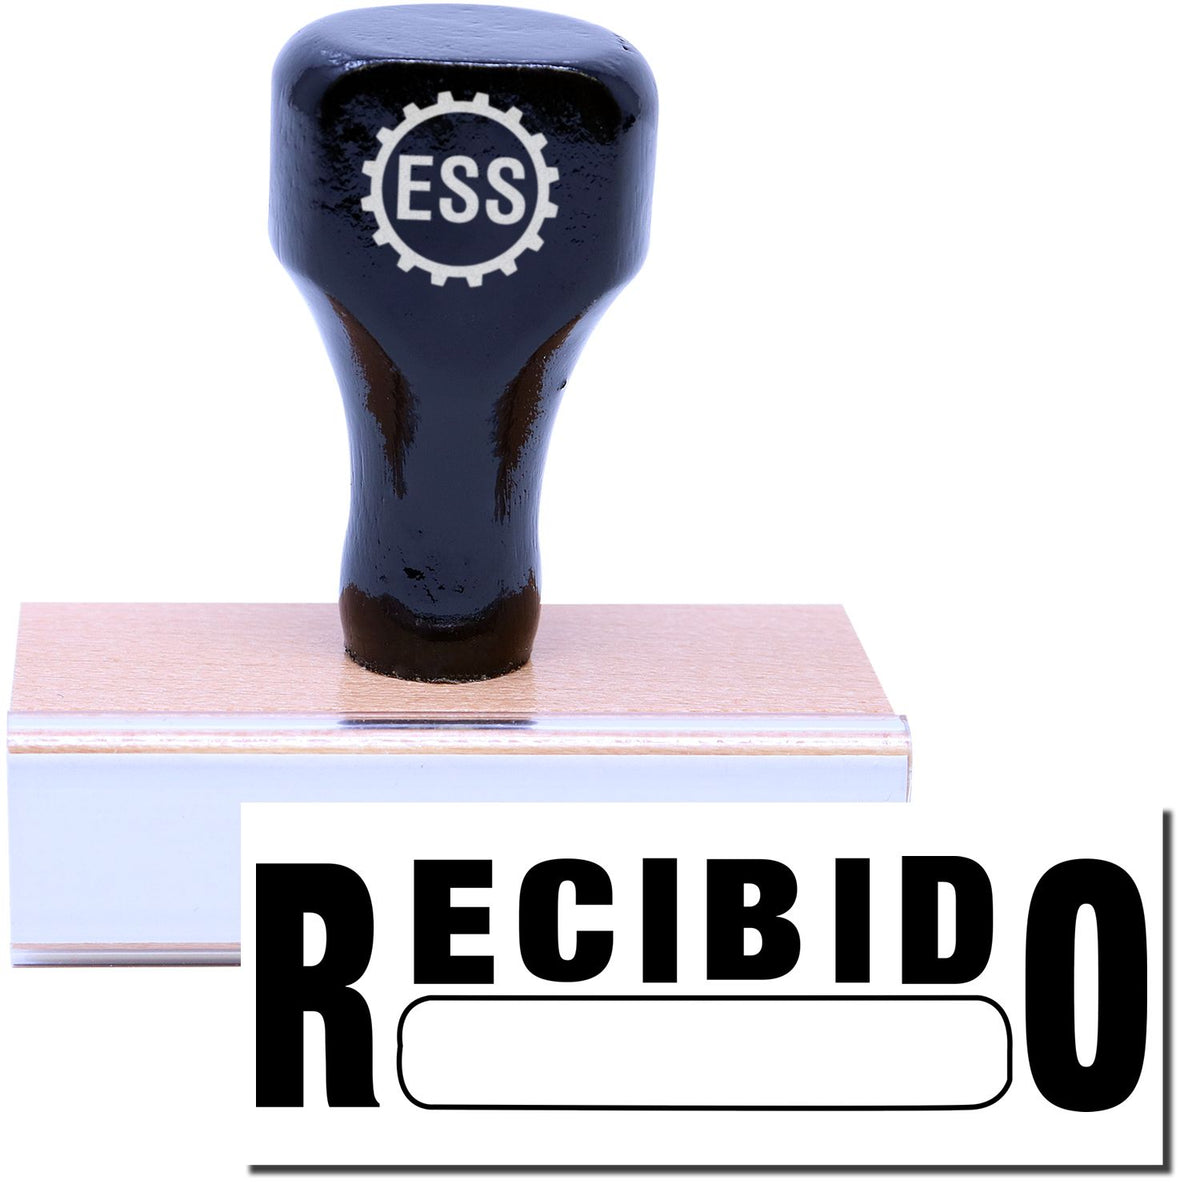 A stock office rubber stamp with a stamped image showing how the text &quot;RECIBIDO&quot; with a box is displayed after stamping.